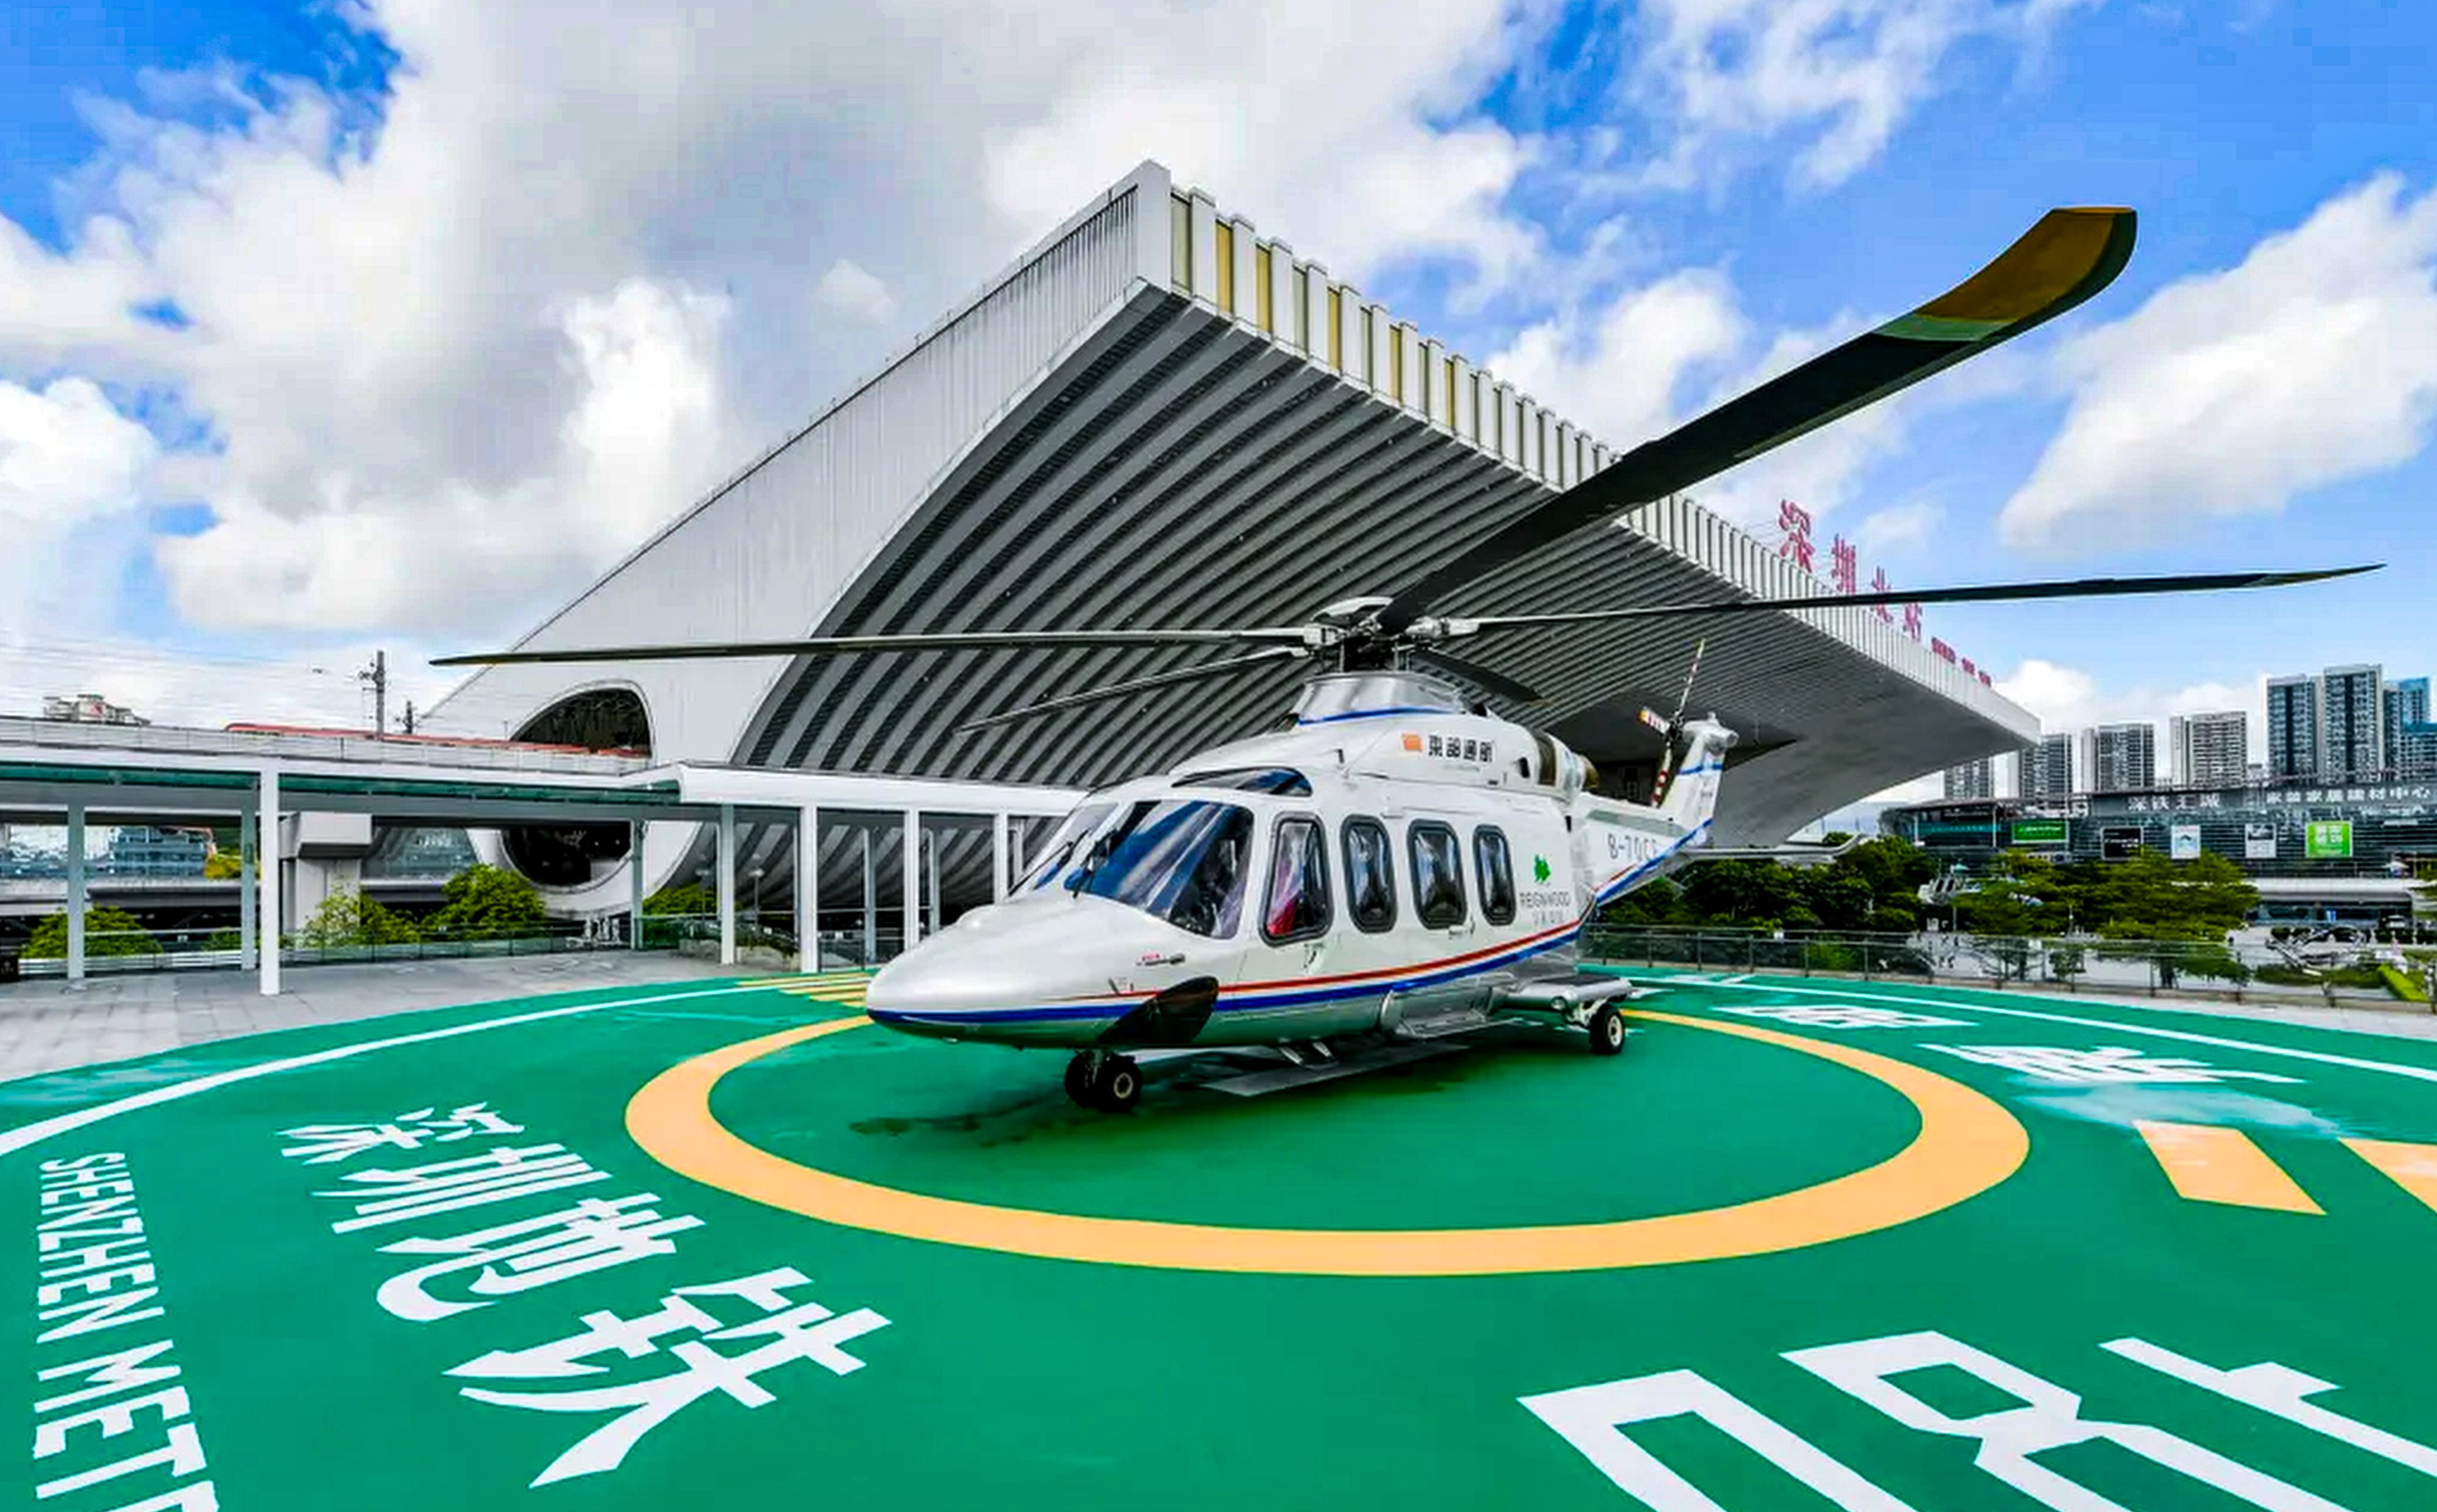 A purpose-built 314 square metre (3,380 sq ft) helipad offers travellers the oppourtunity to connect quickly within the southern tech hub of Shenzhen. Photo: Shenzhen Metro